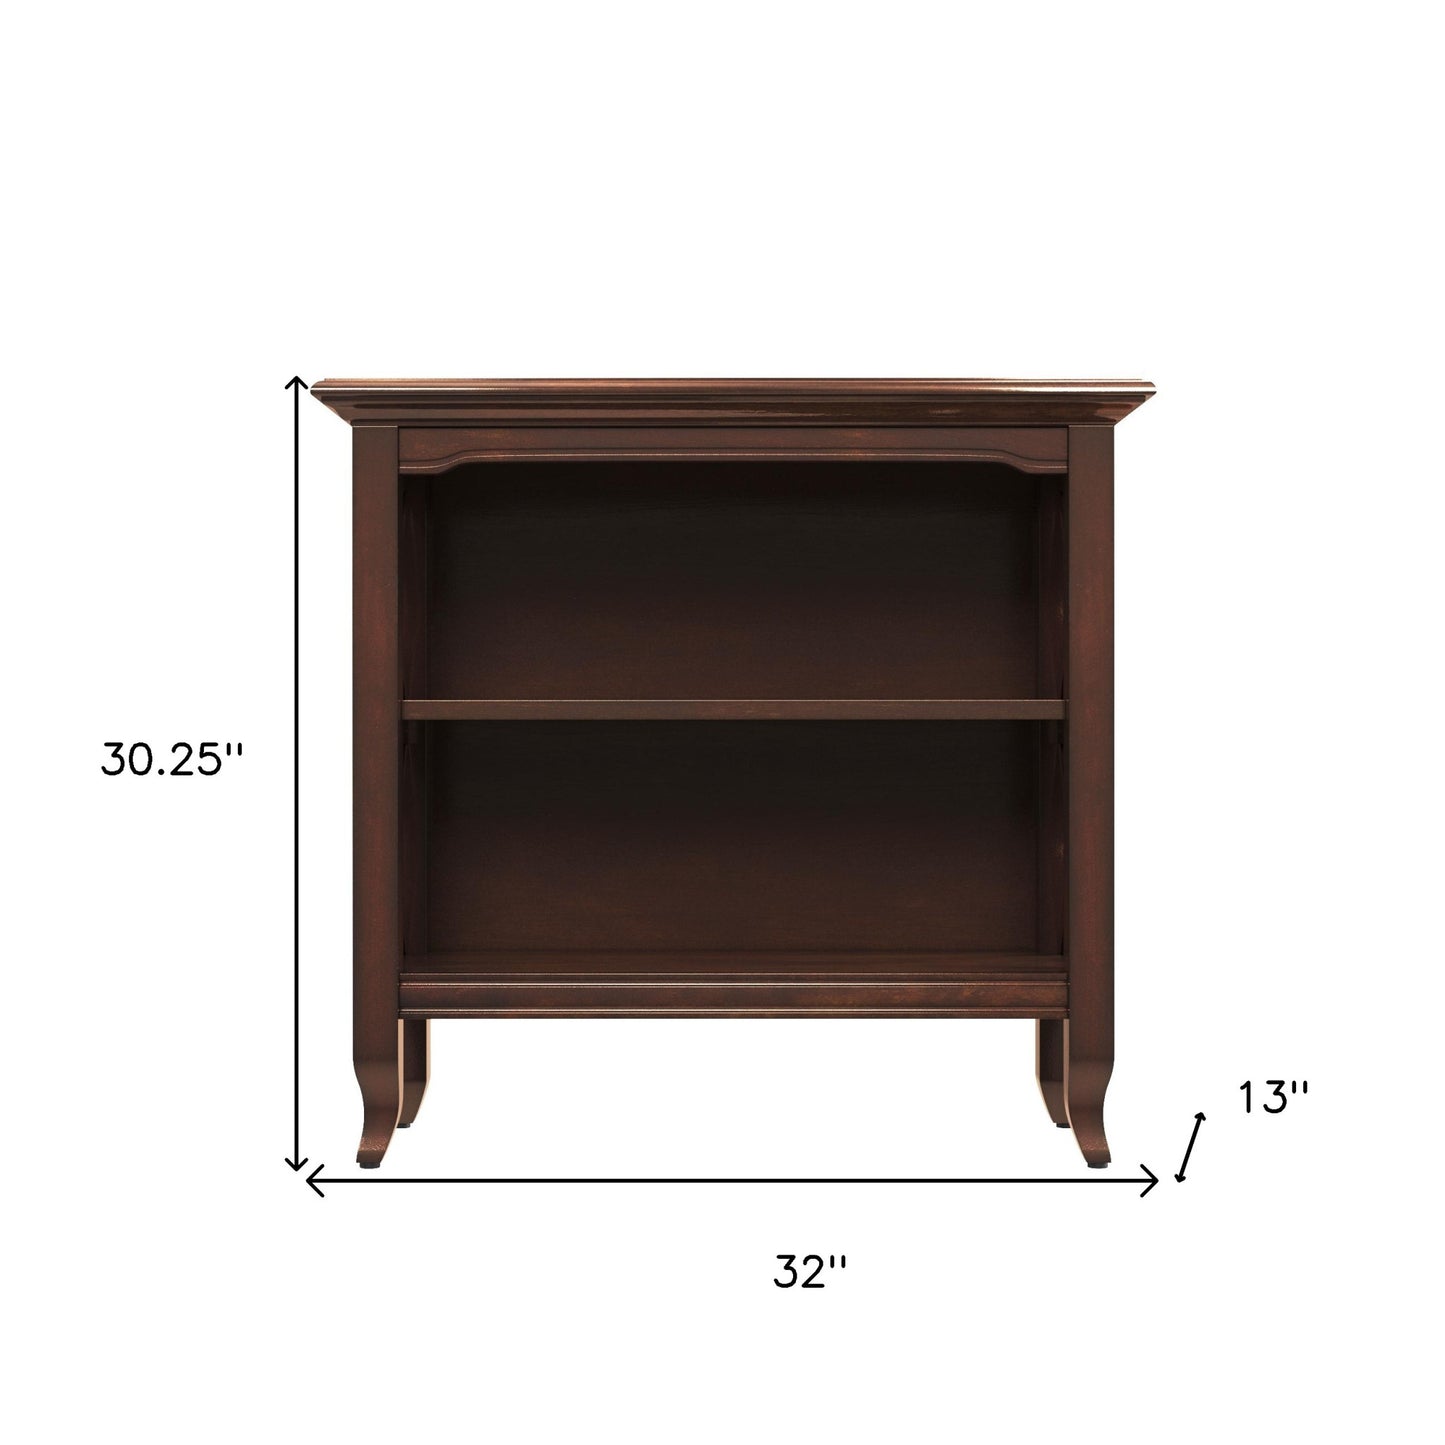 30" Brown Wood Two Tier Bookcase